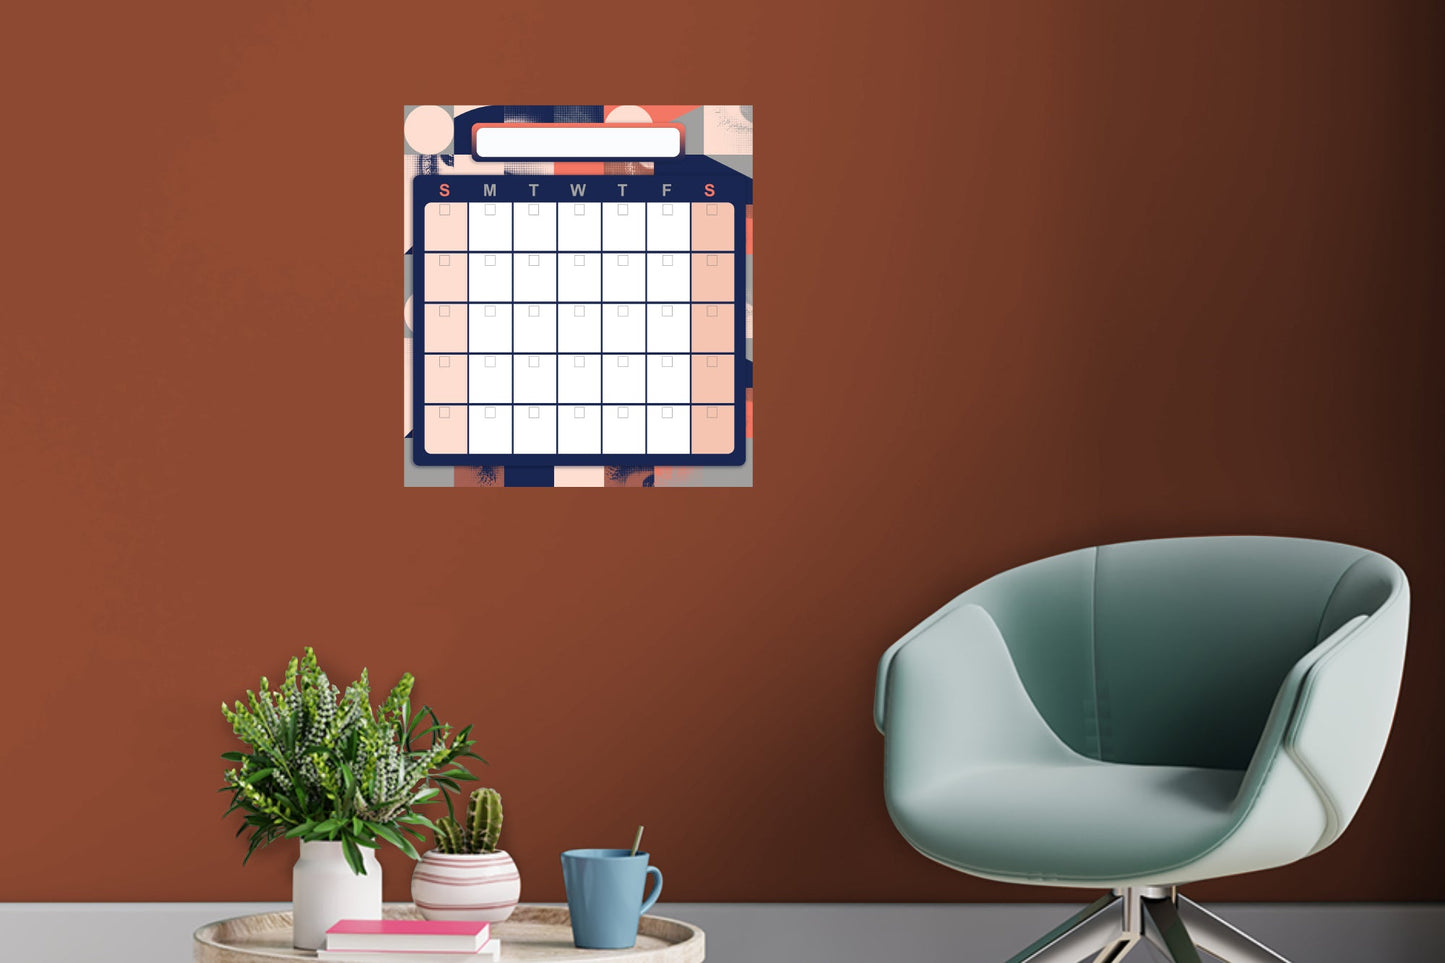 Calendars: Color Block One Month Calendar Dry Erase - Removable Adhesive Decal